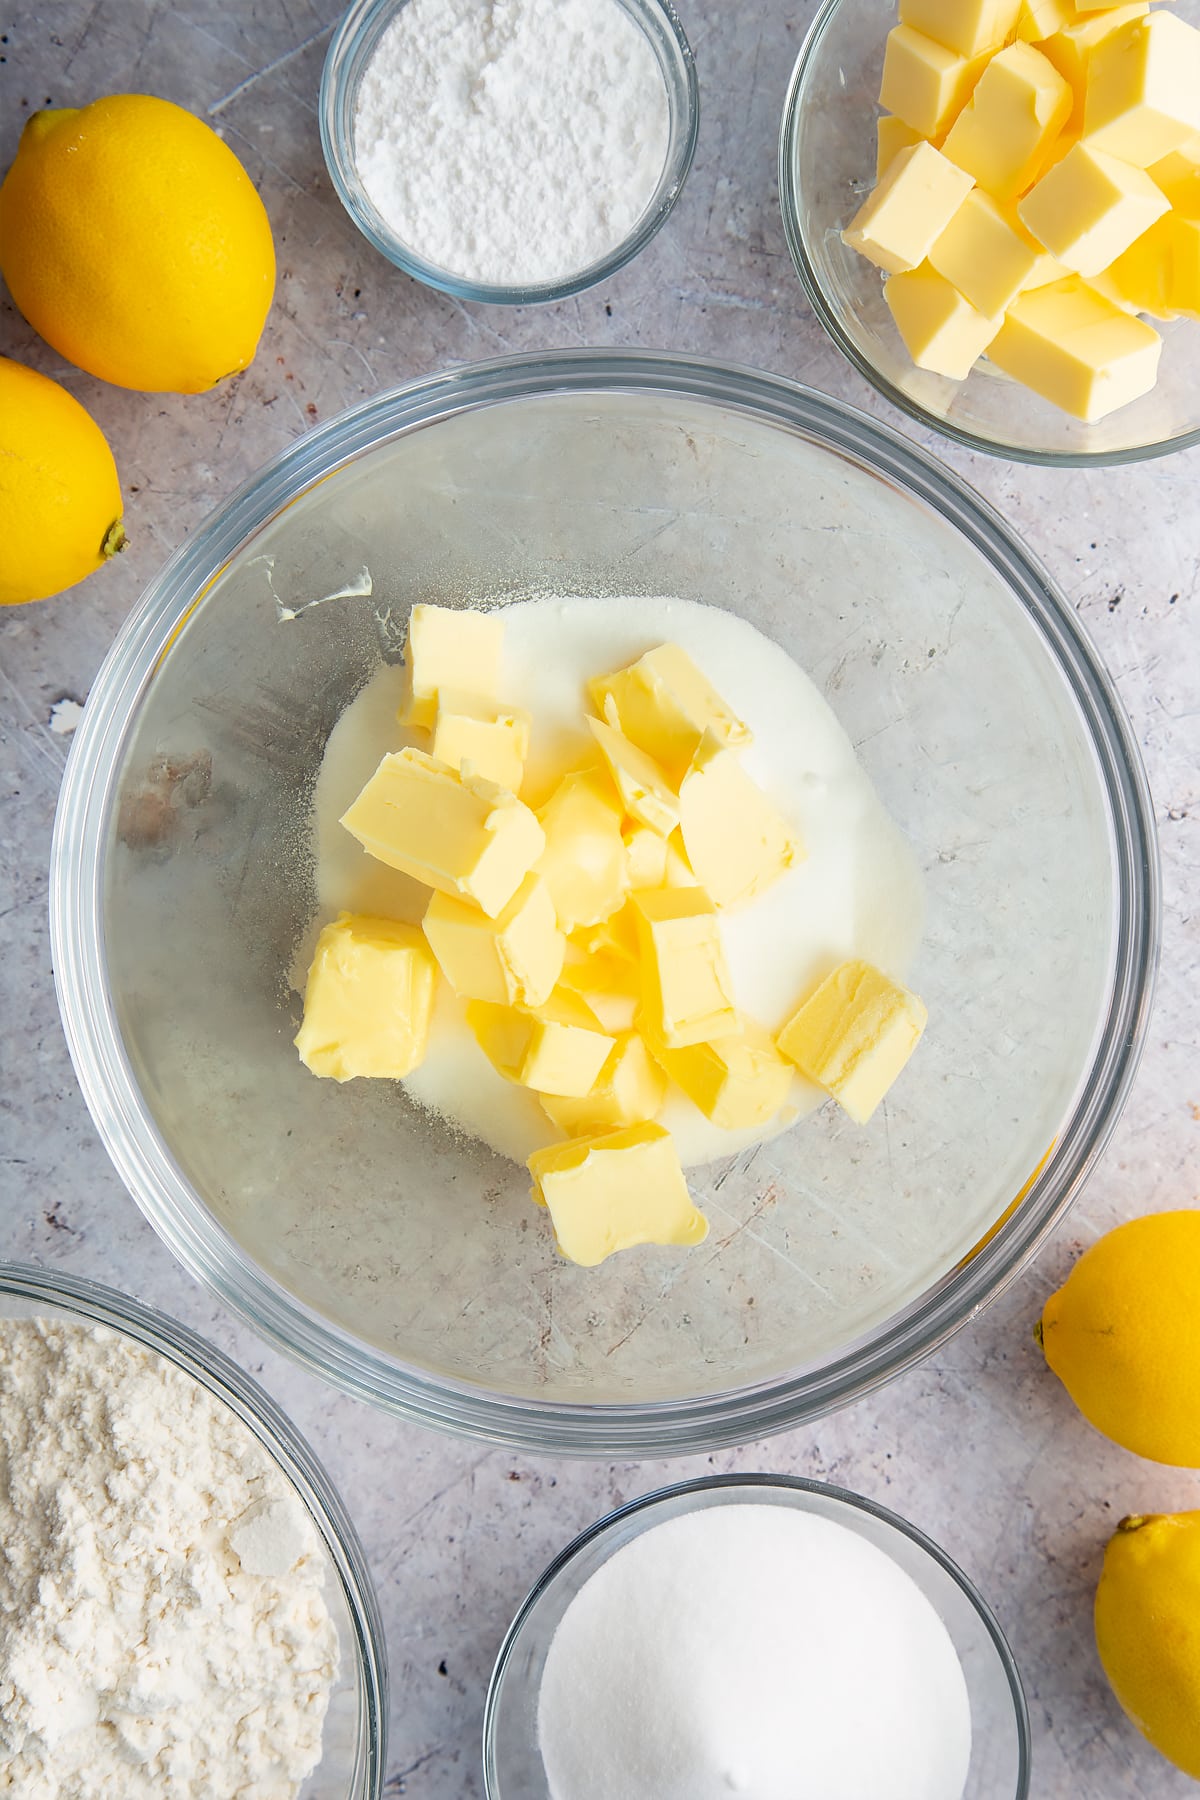 Butter and sugar in a glass bowl. Ingredients to make lemon drizzle cake surround the bowl. 